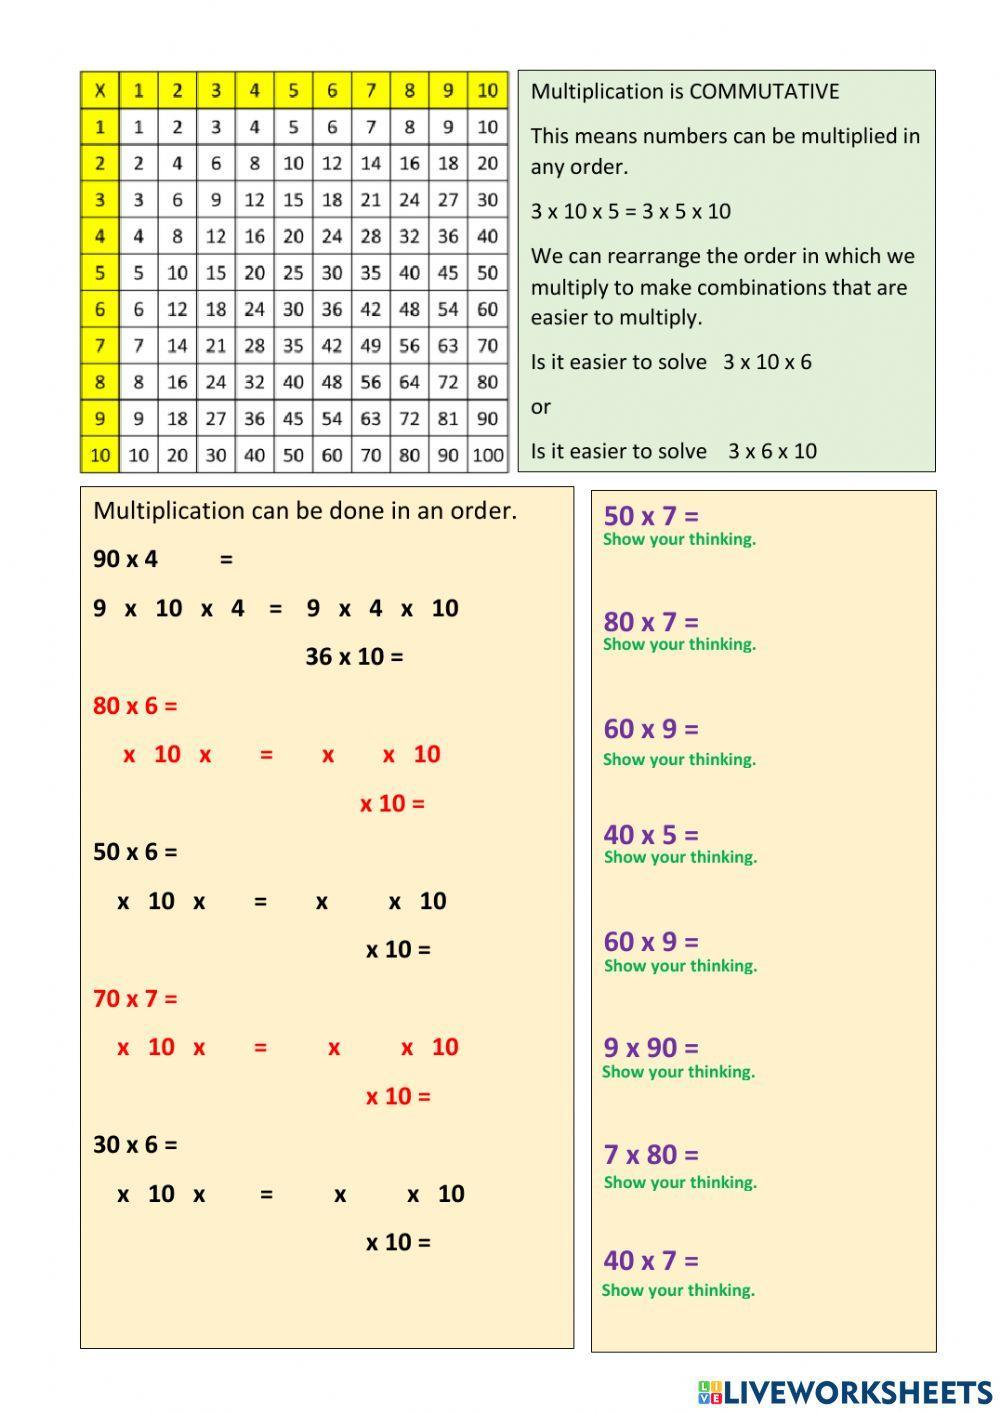 CHILL5 Multiplication Multiplying by Multiples of 10 Set 4